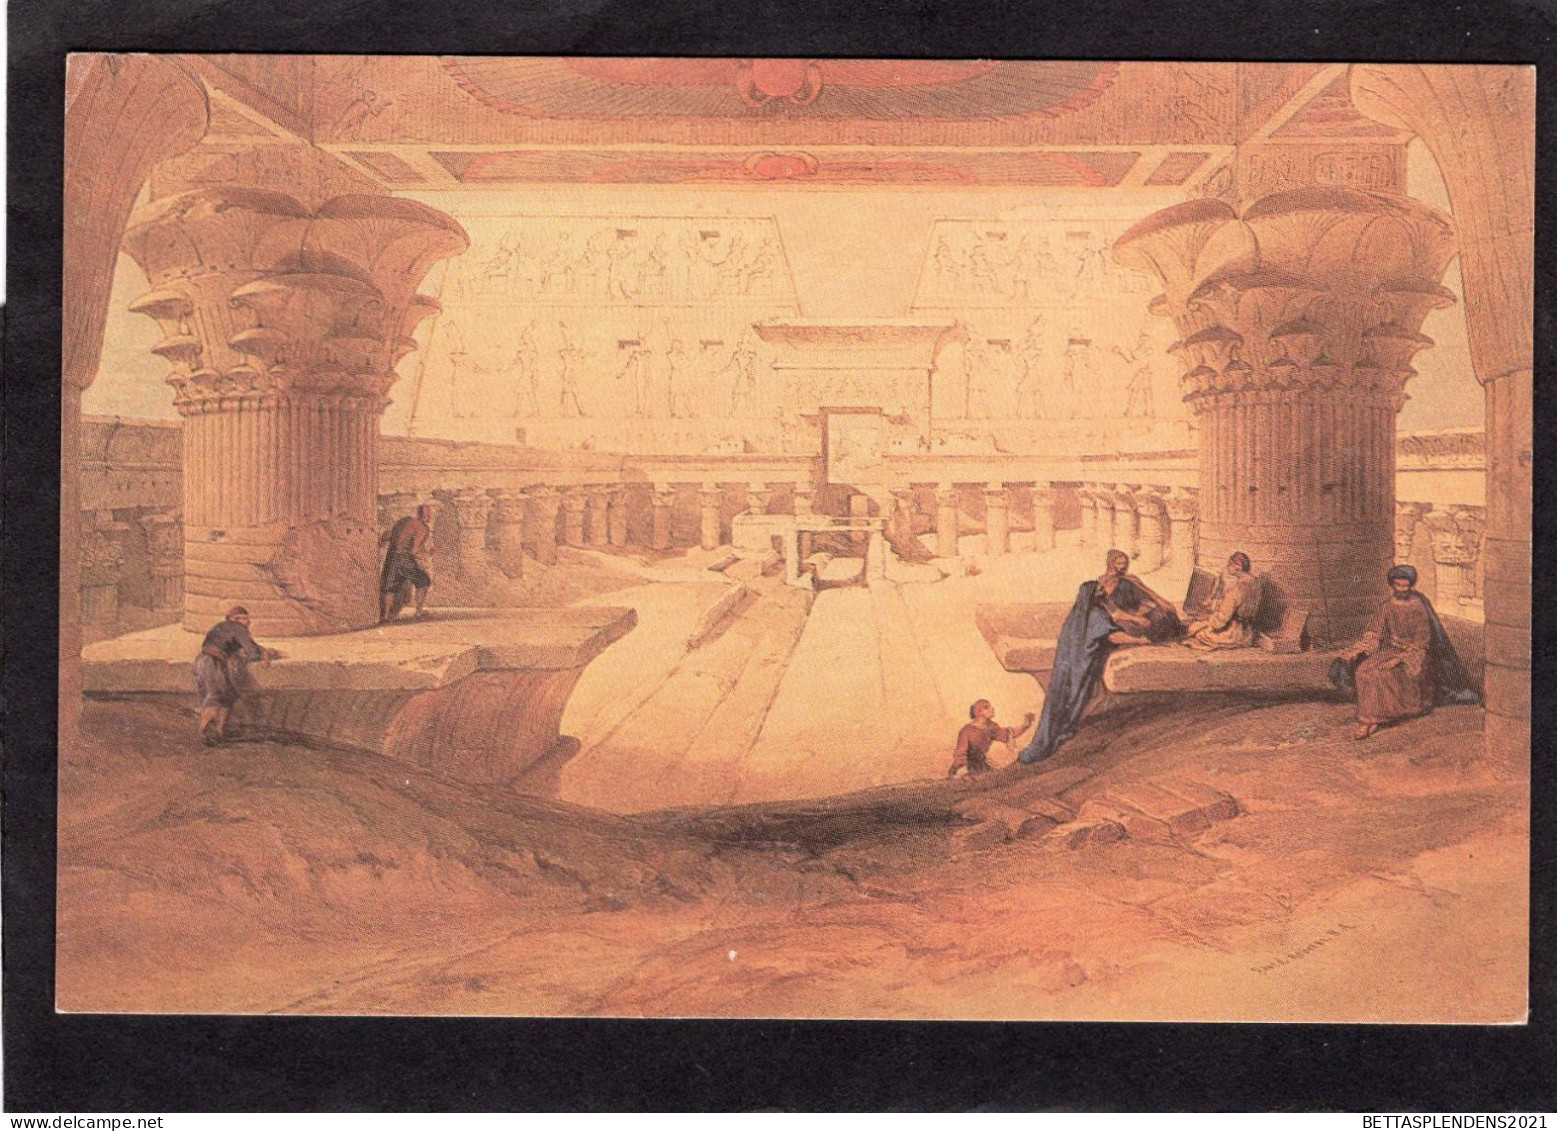 CPM Reproduction - VIEW FROM UNDER THE PORTICO OF THE TEMPLE OF EDFOU, UPPER EGYPT - Lithograph By David Roberts - Idfu